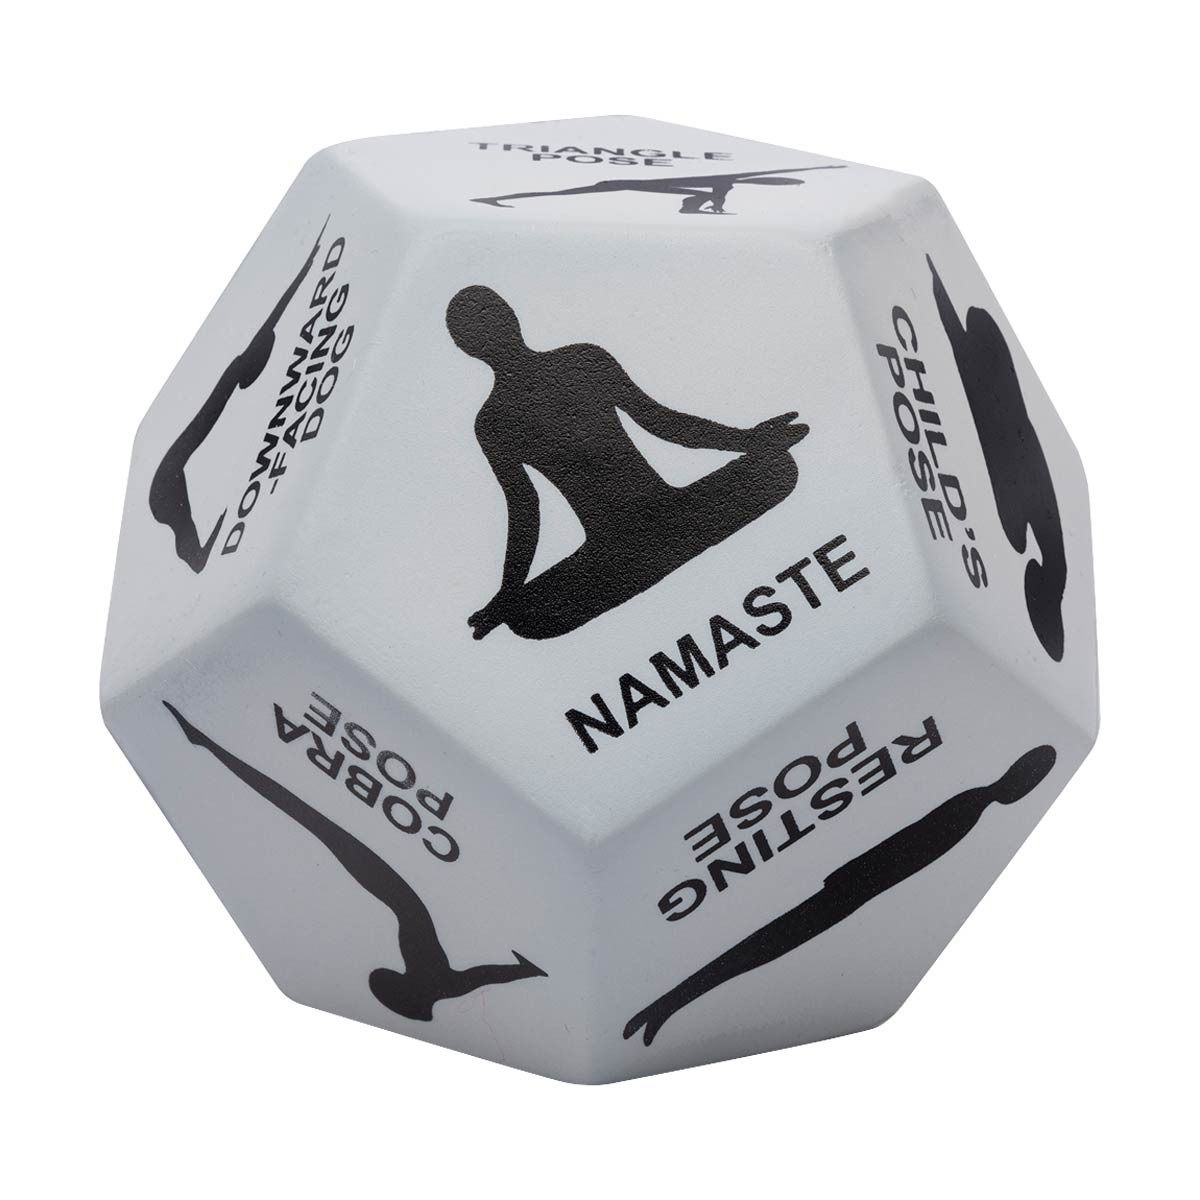 Series-8 Fitness 12-Sided Yoga dice